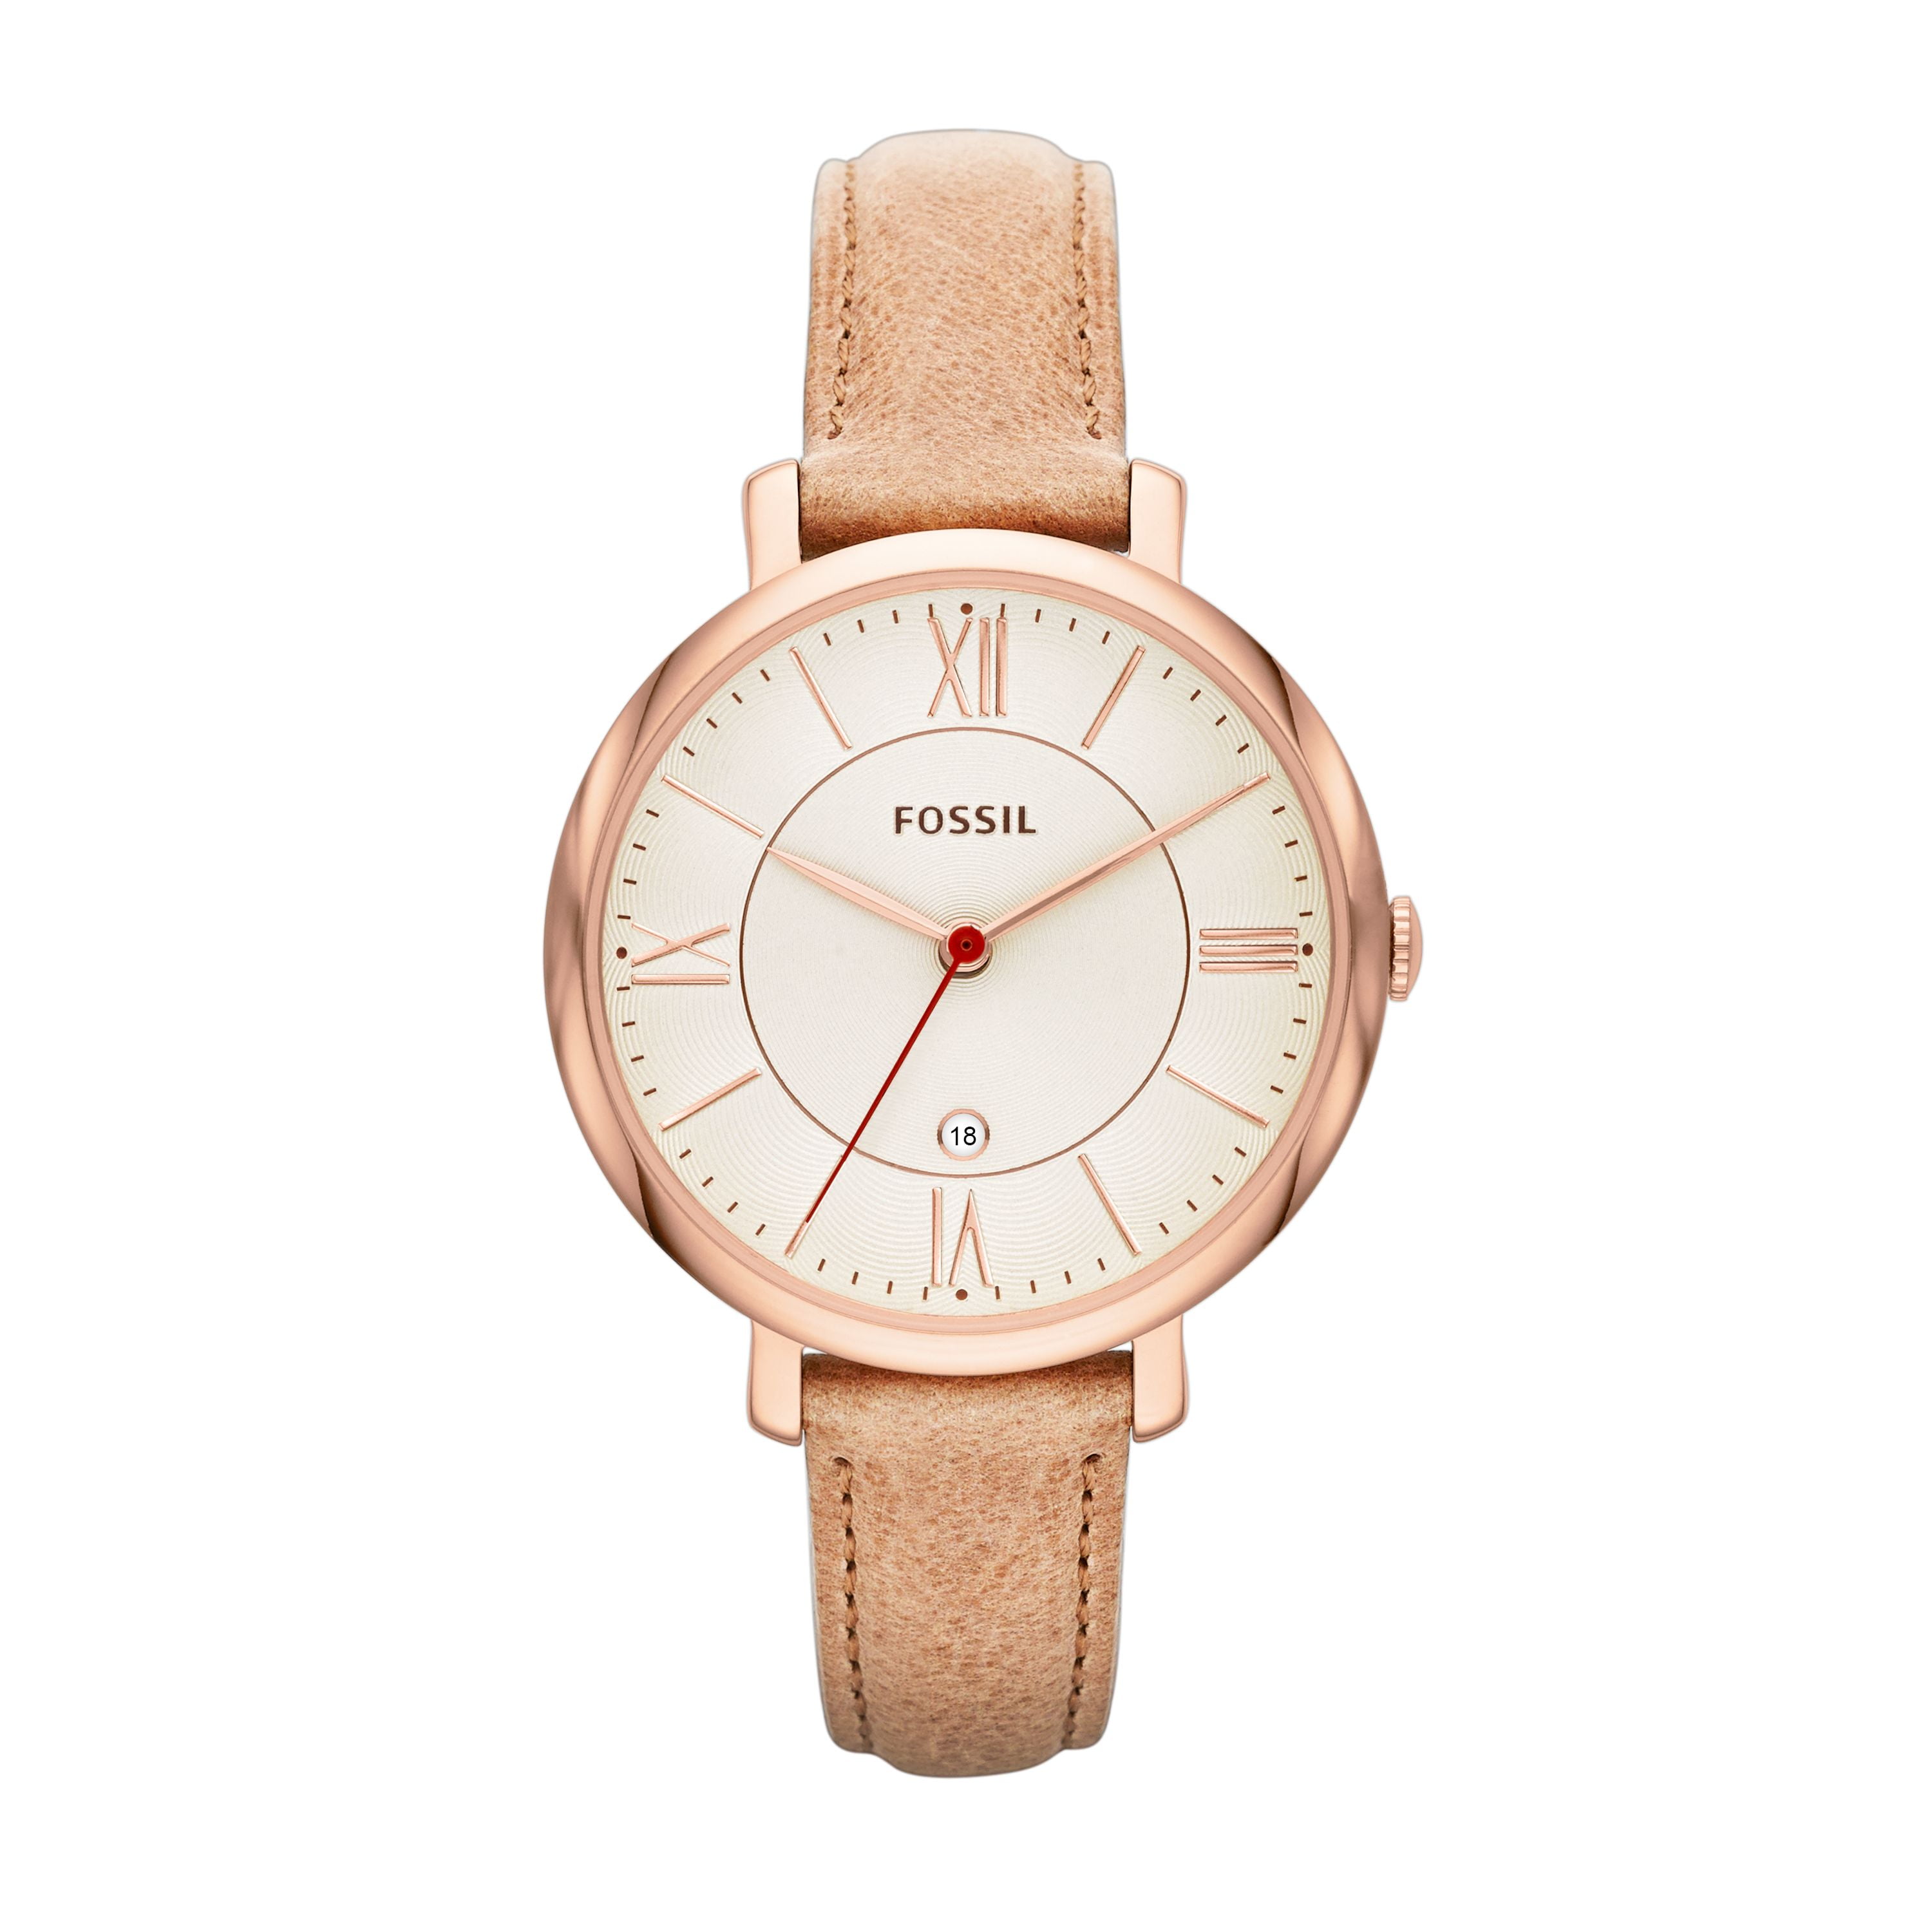 Fossil Women's Jacqueline Three-Hand Tan Leather Band Watch (Style ...